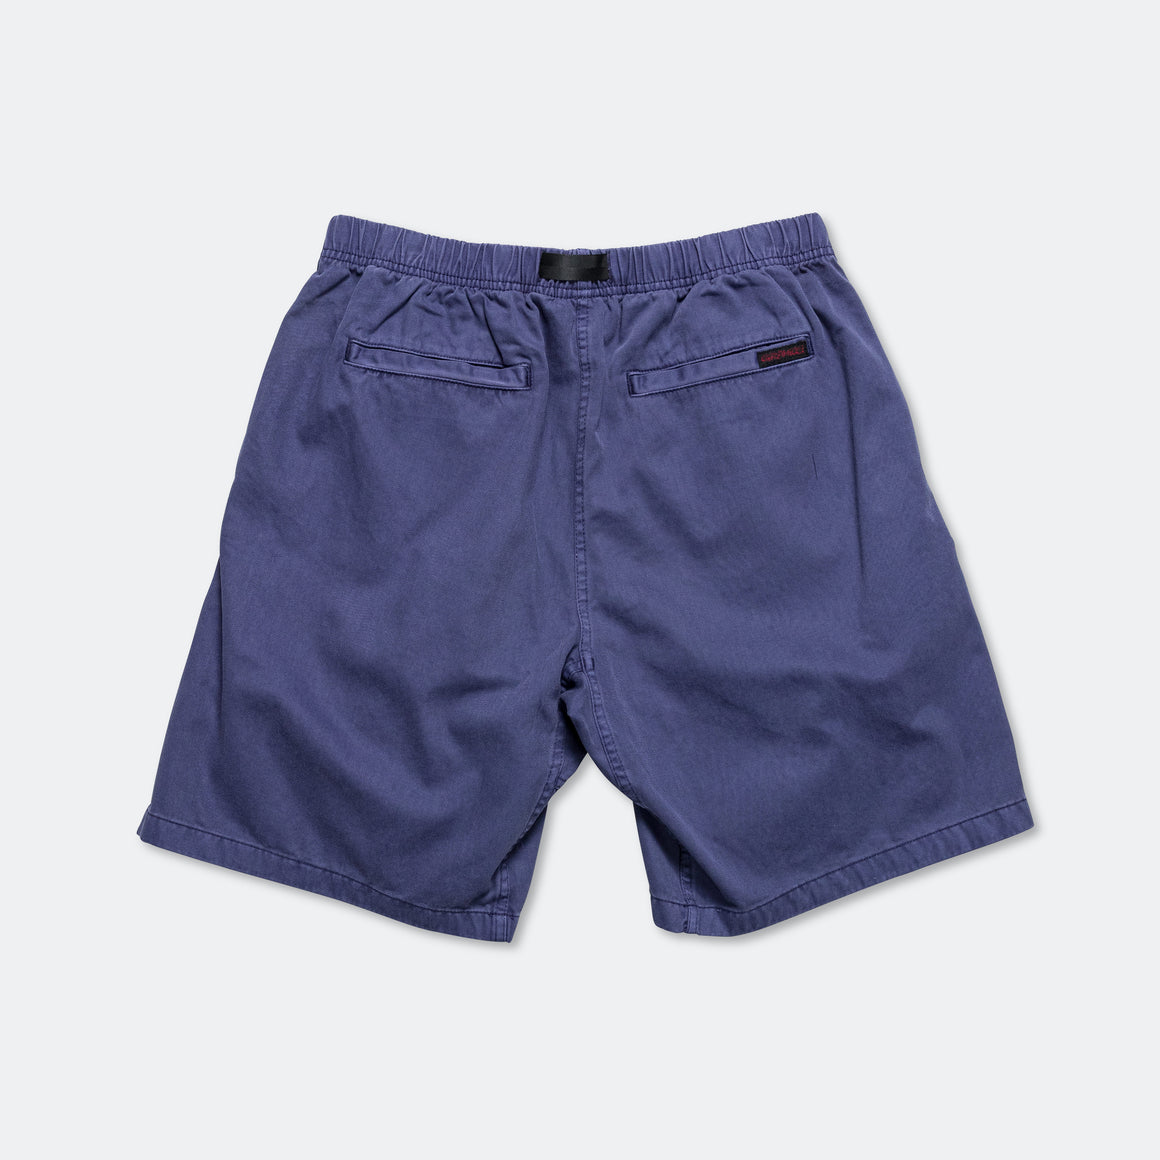 Gramicci - G-Short Pigement Dye - Grey Purple - UP THERE